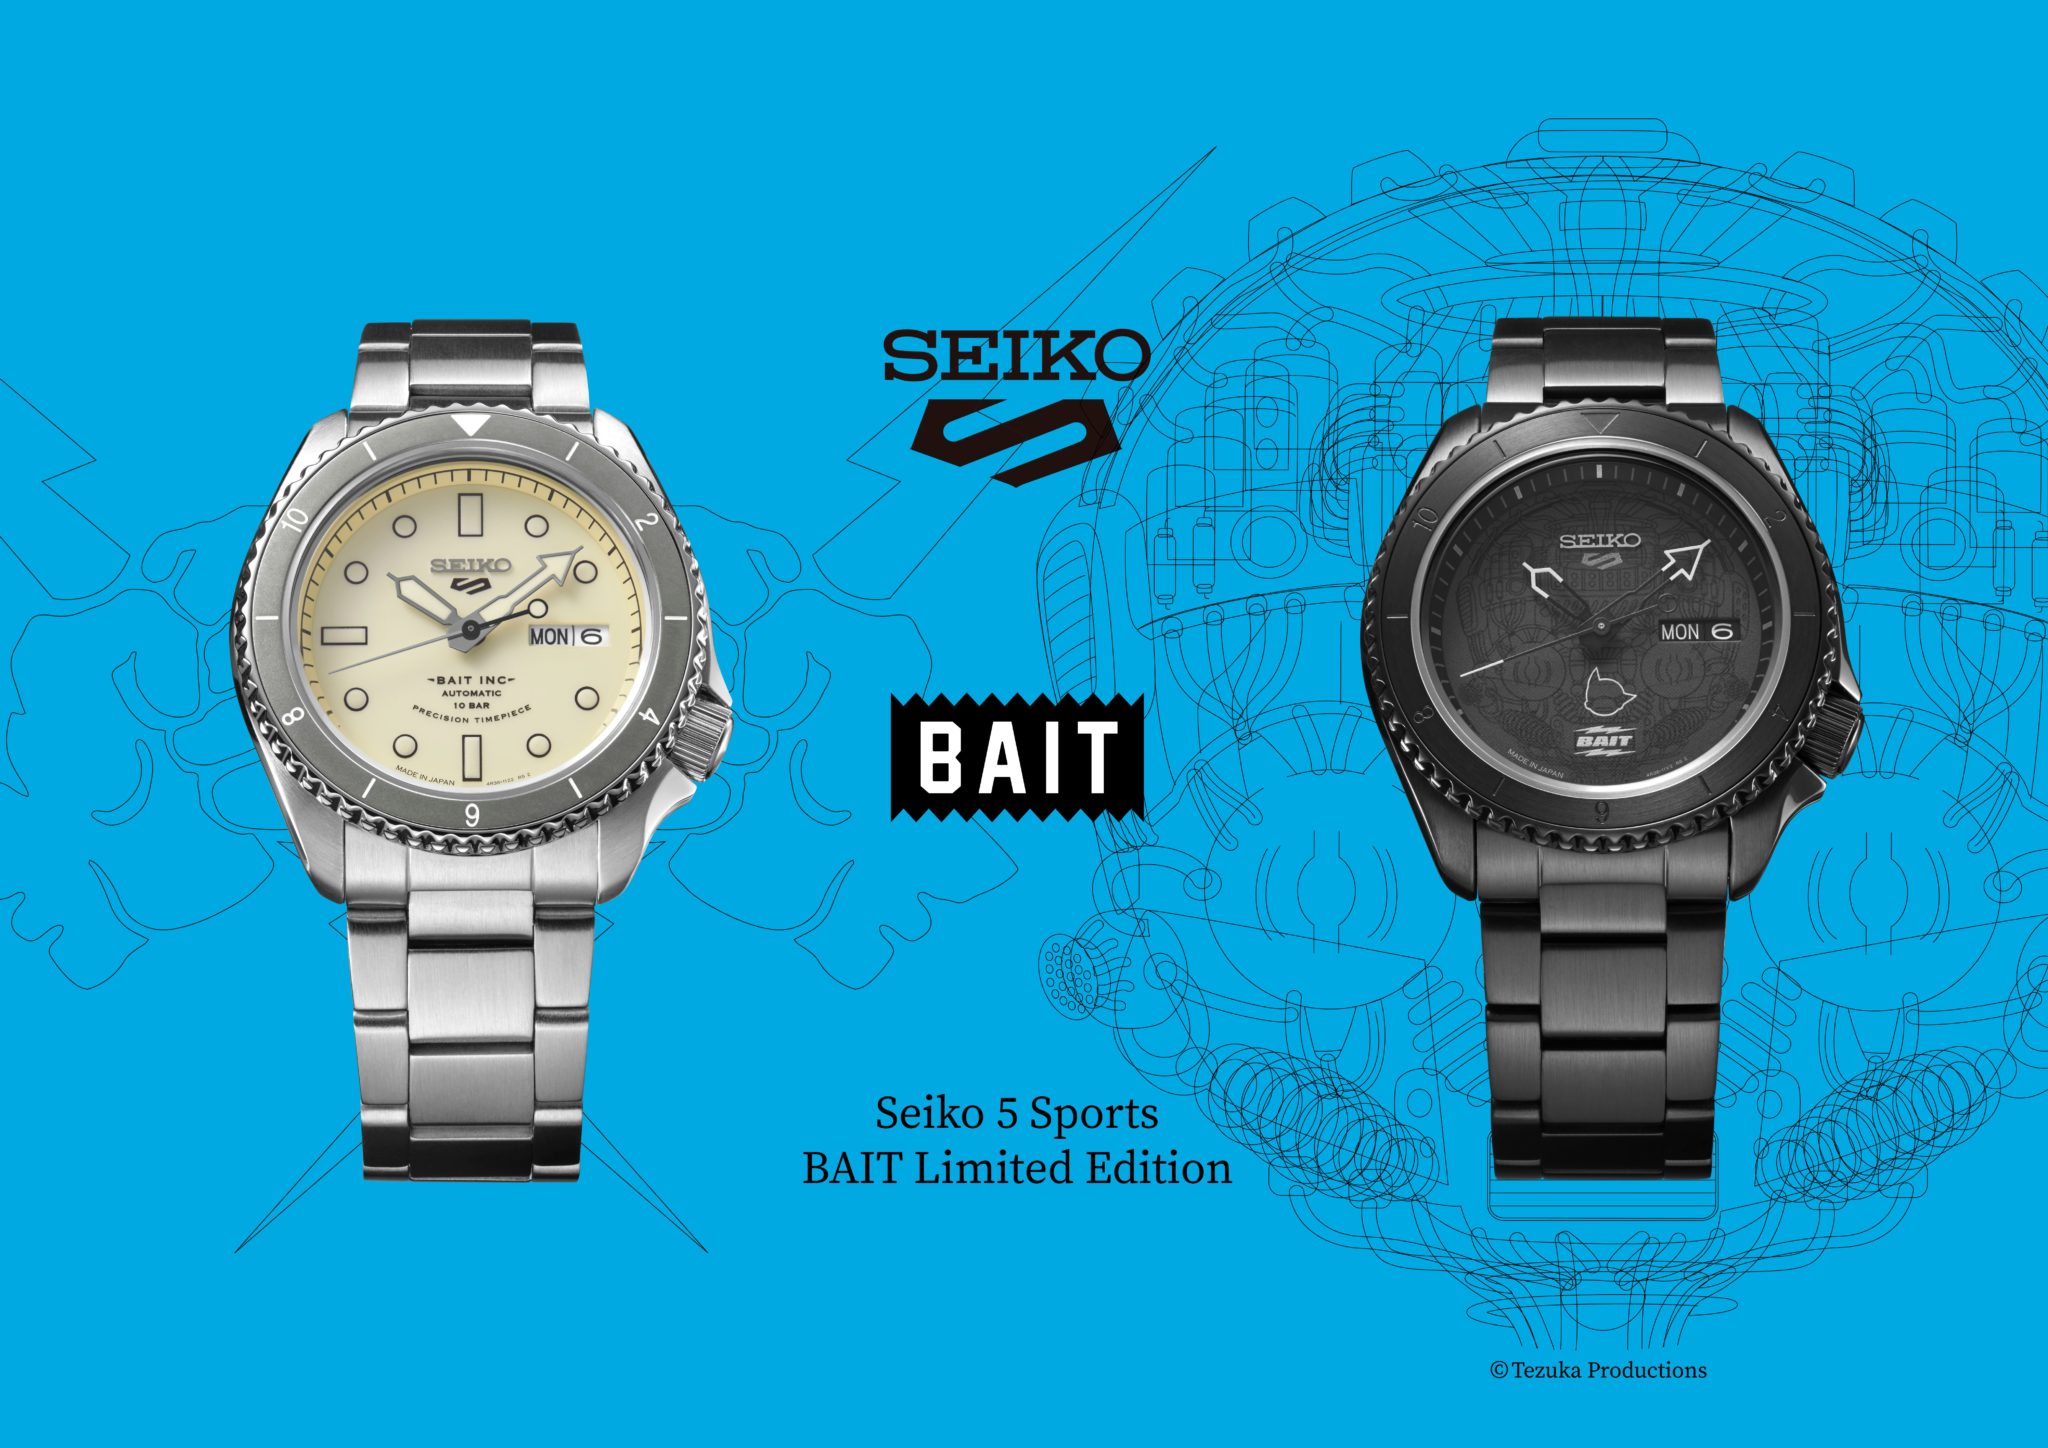 SEIKO 5 Sports sparks special collab with west coast retailer